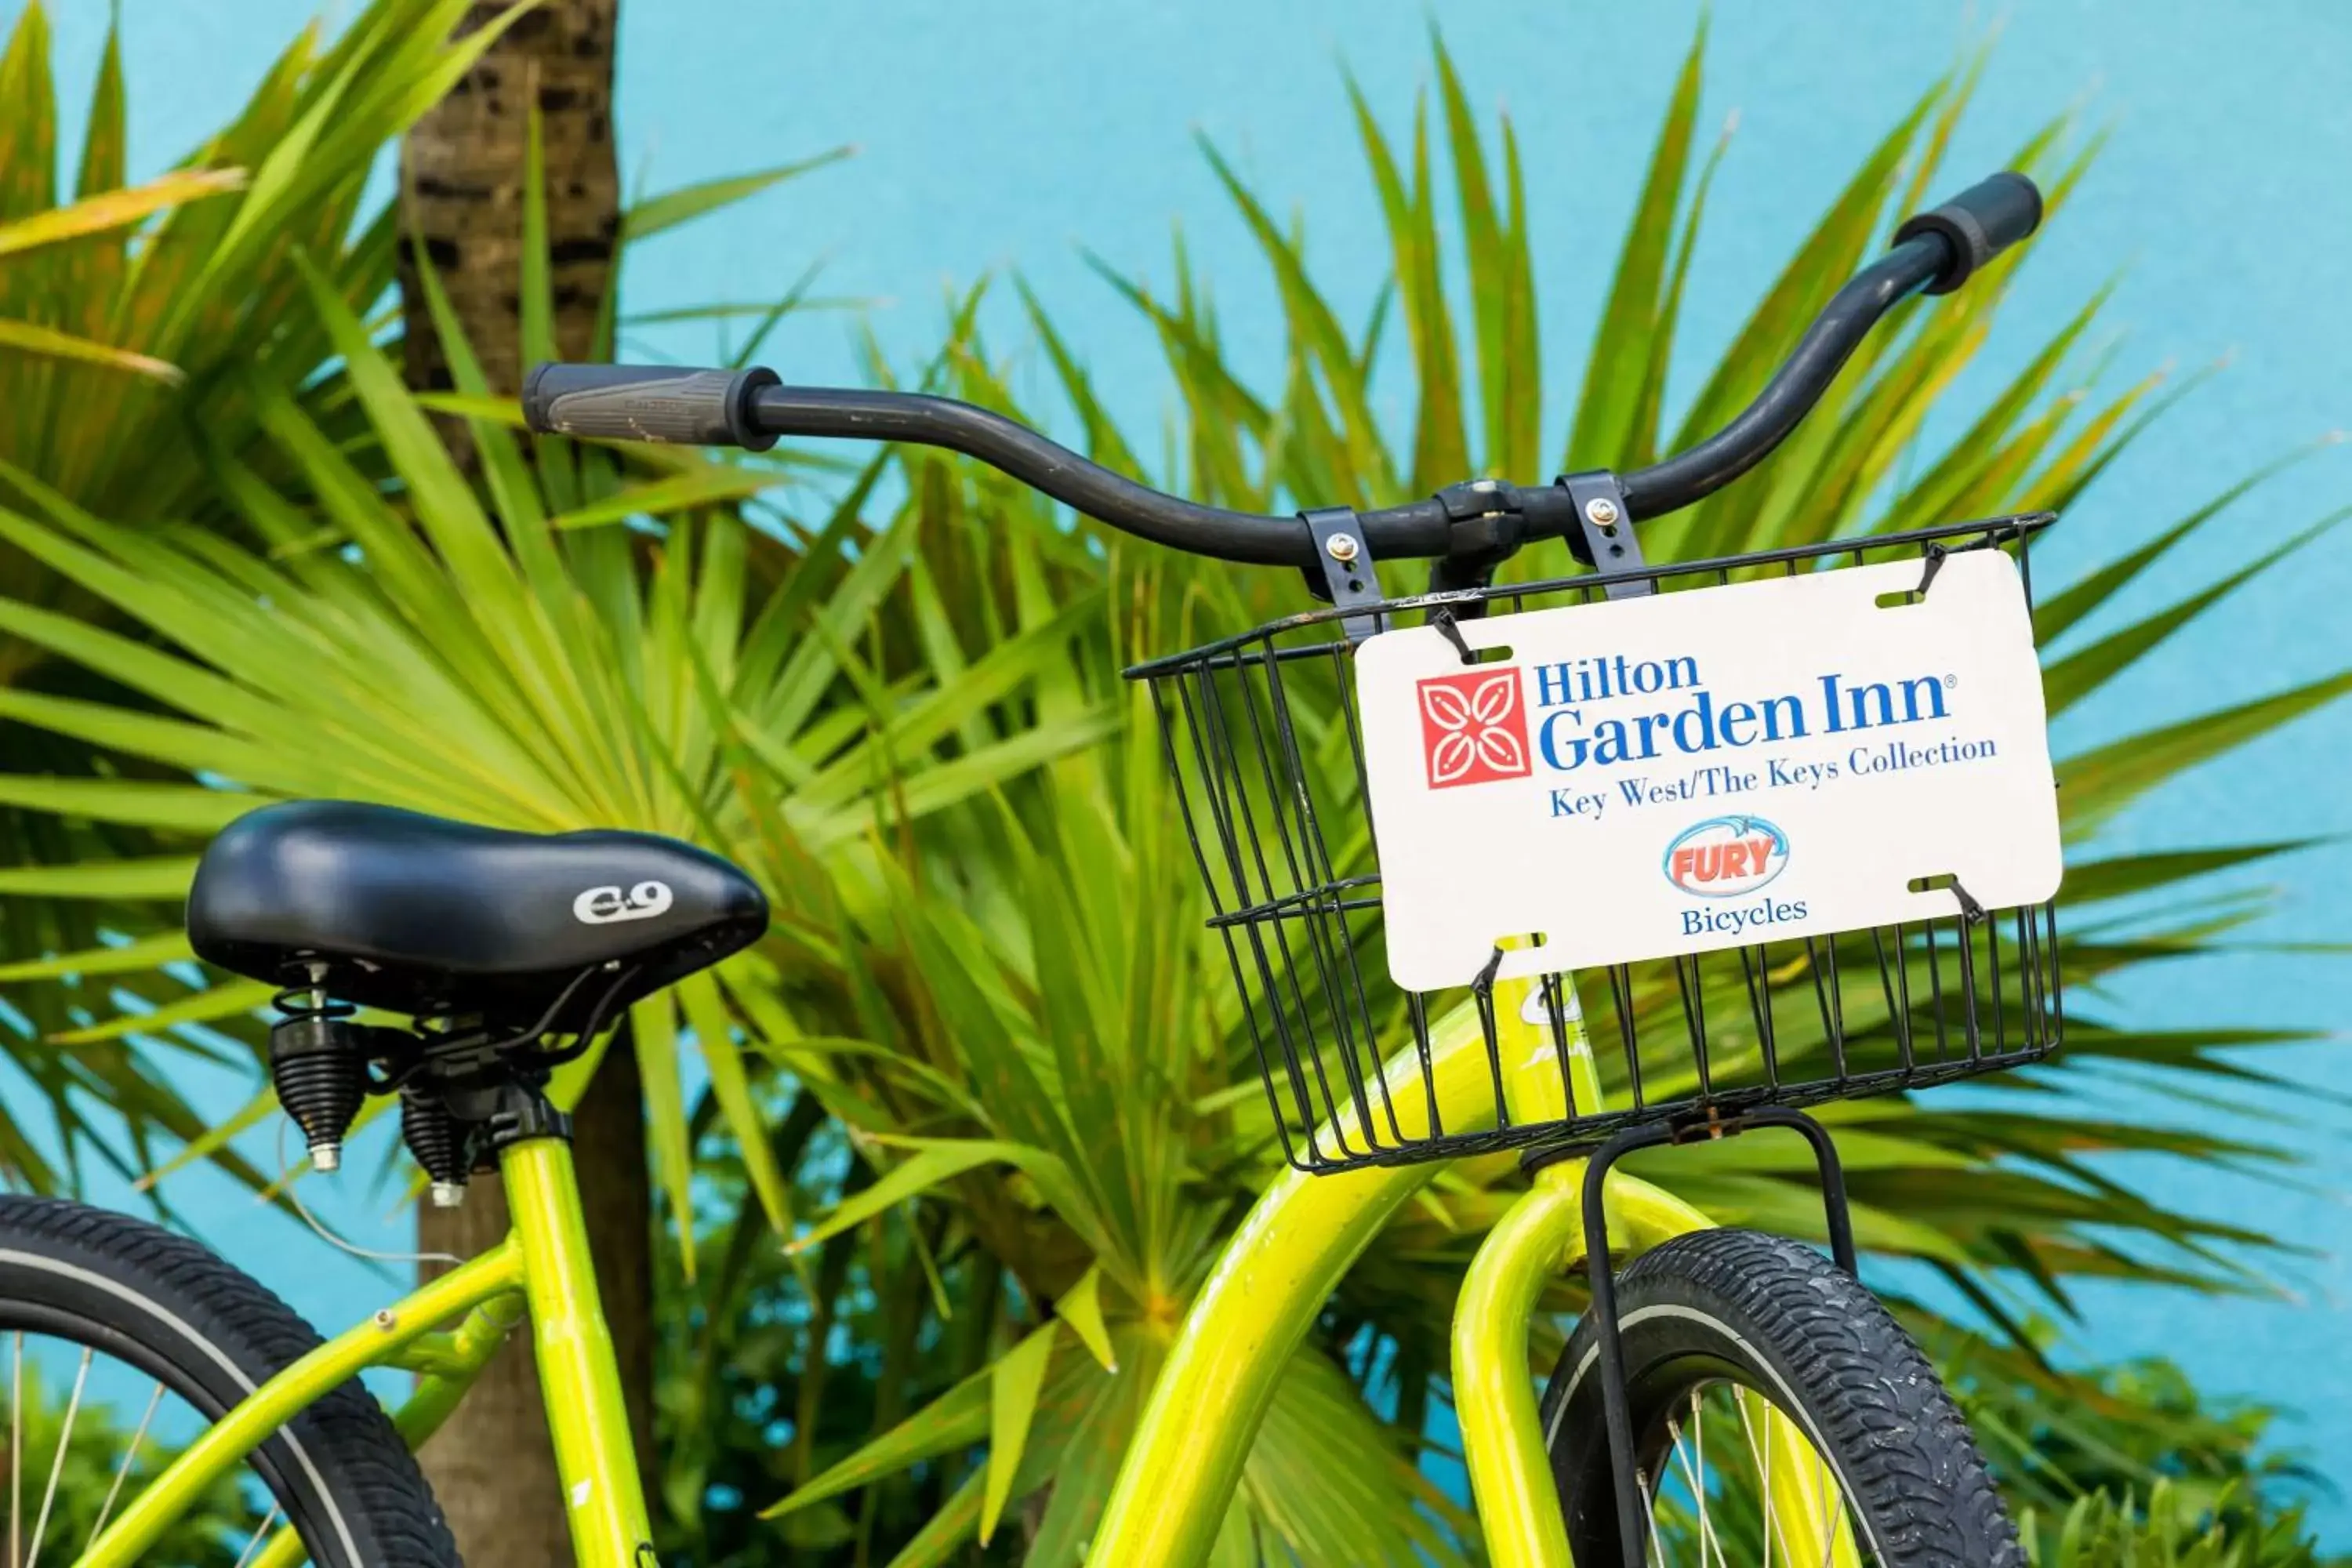 Property building, Fitness Center/Facilities in Hilton Garden Inn Key West / The Keys Collection